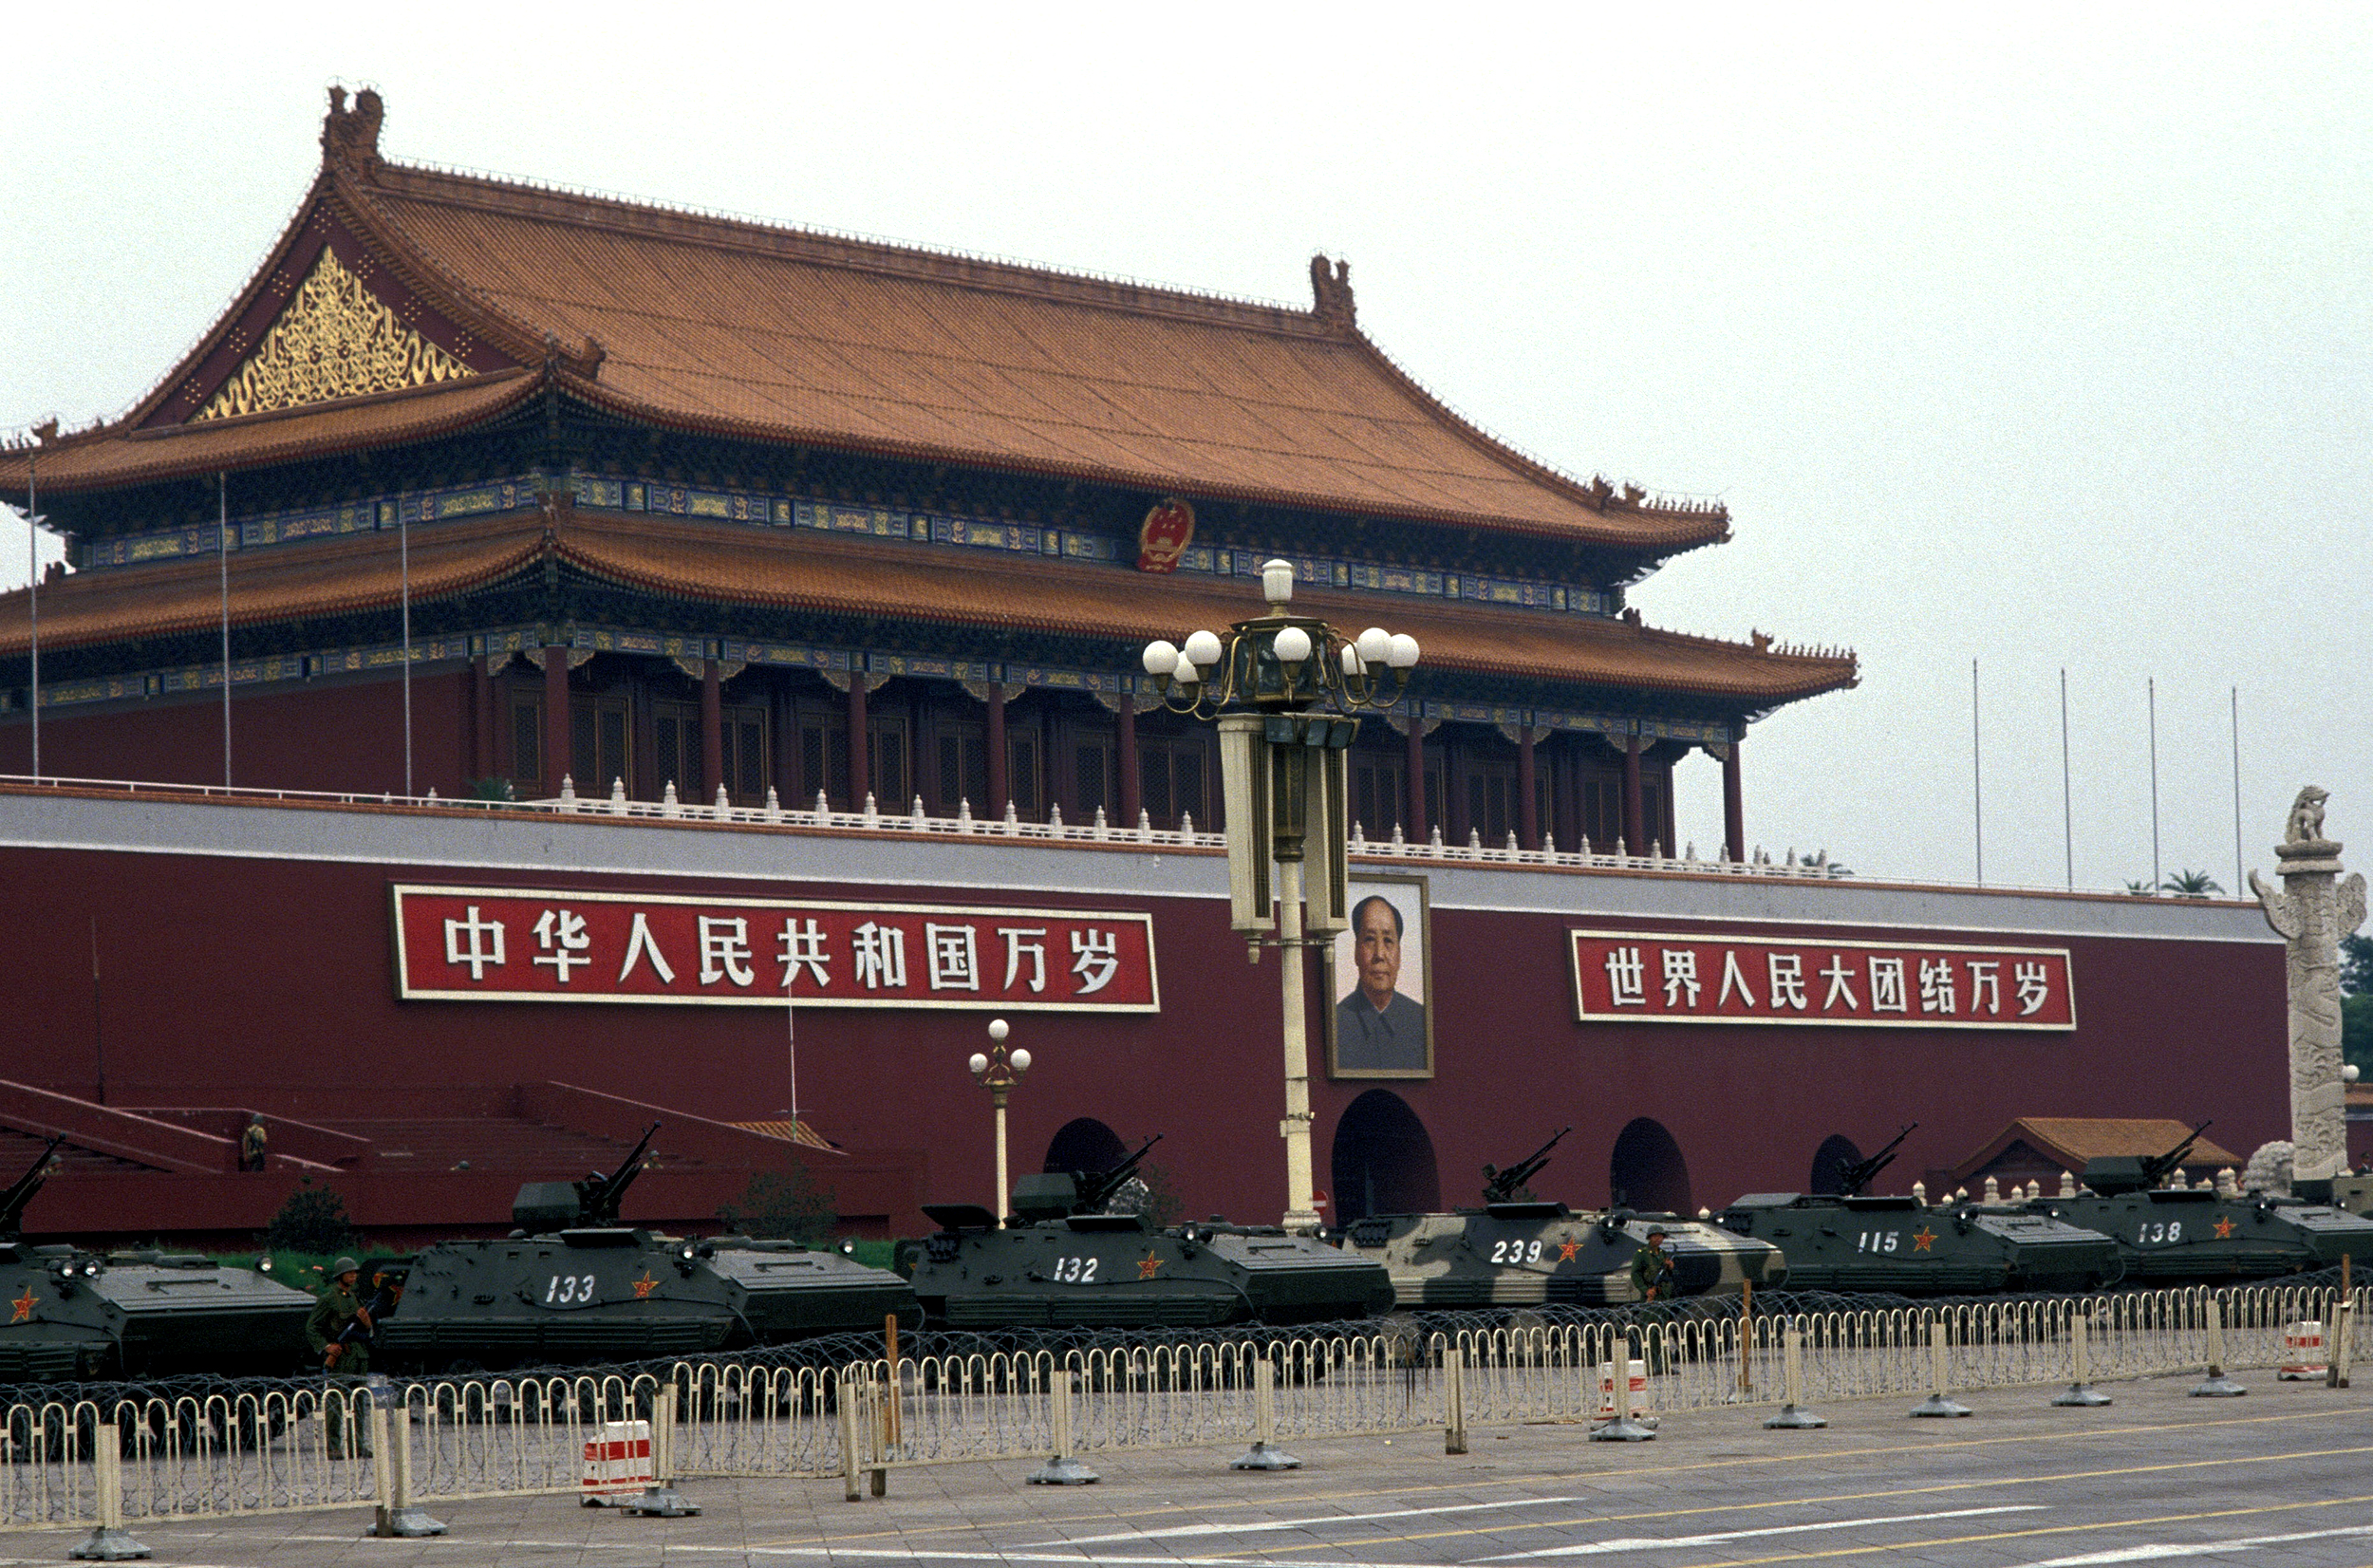 The tanks on Tiananmen Square in Beijing China on June 11, 1989. (Gamma-Rapho/Getty Images)